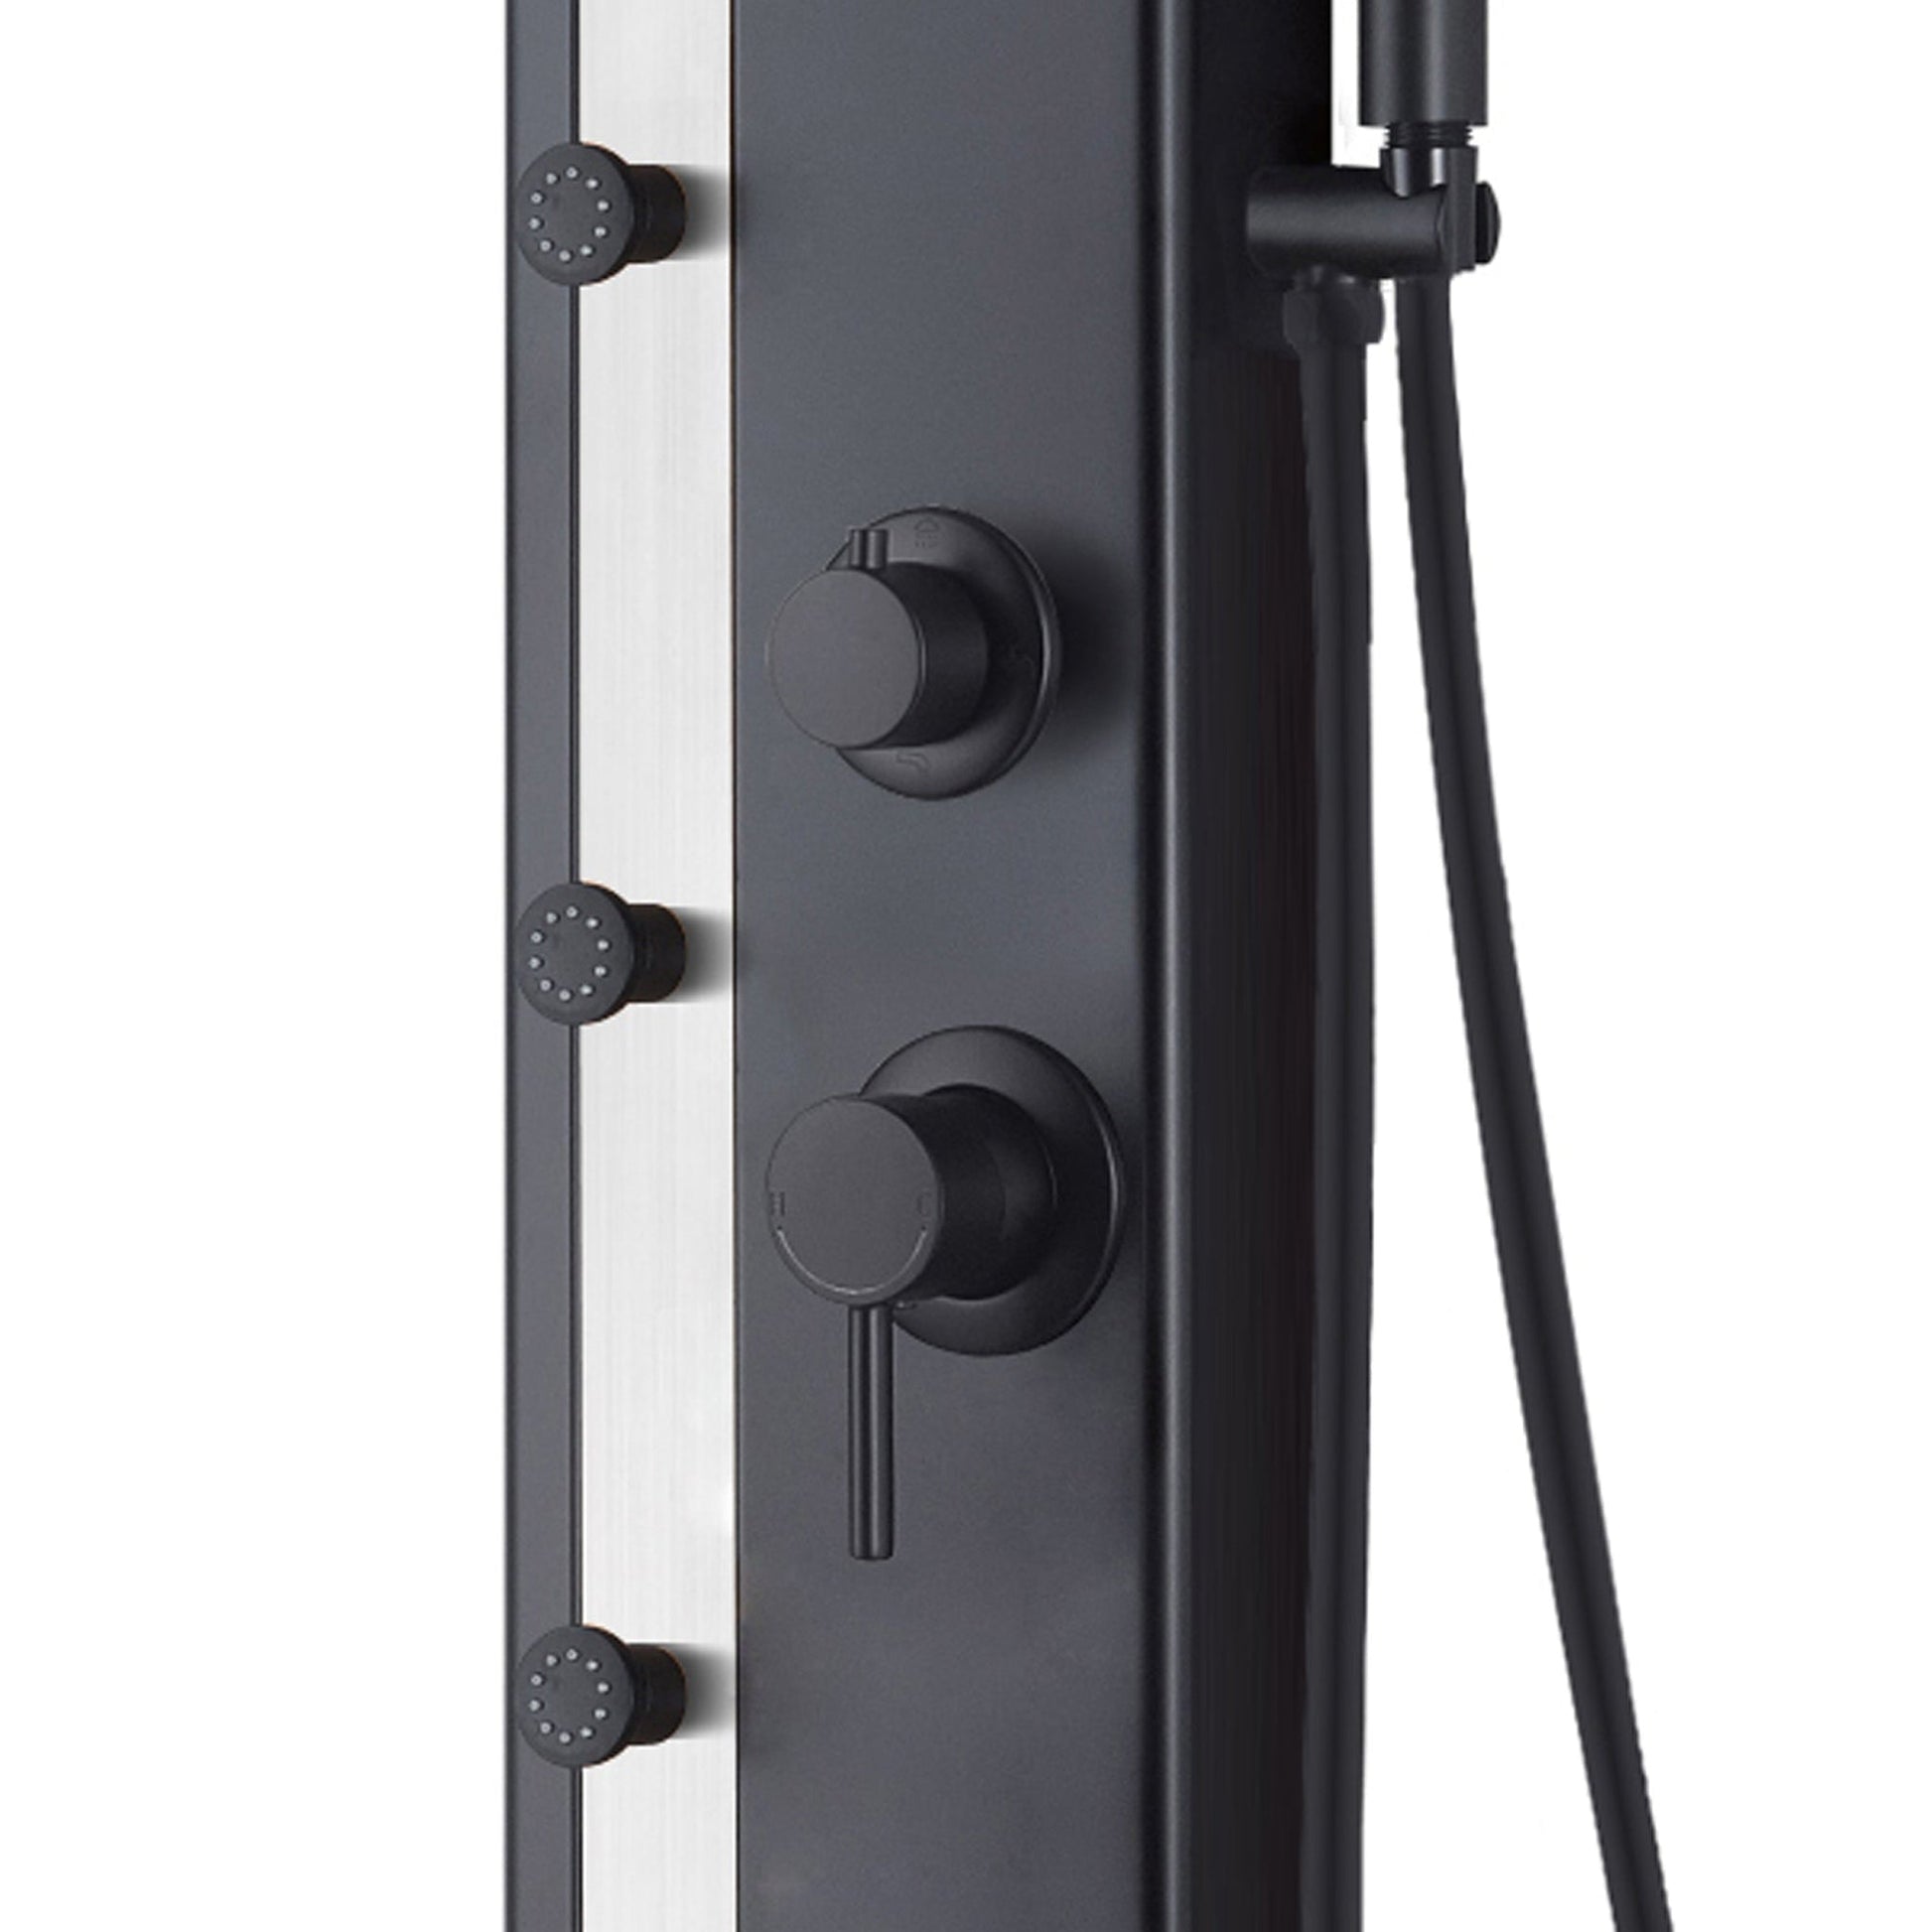 PULSE ShowerSpas Eclipse 57" Rain Shower Panel 2.5 GPM in Matte Black and Brushed Stainless Steel Finish With 4-Body Jet and Handheld Shower